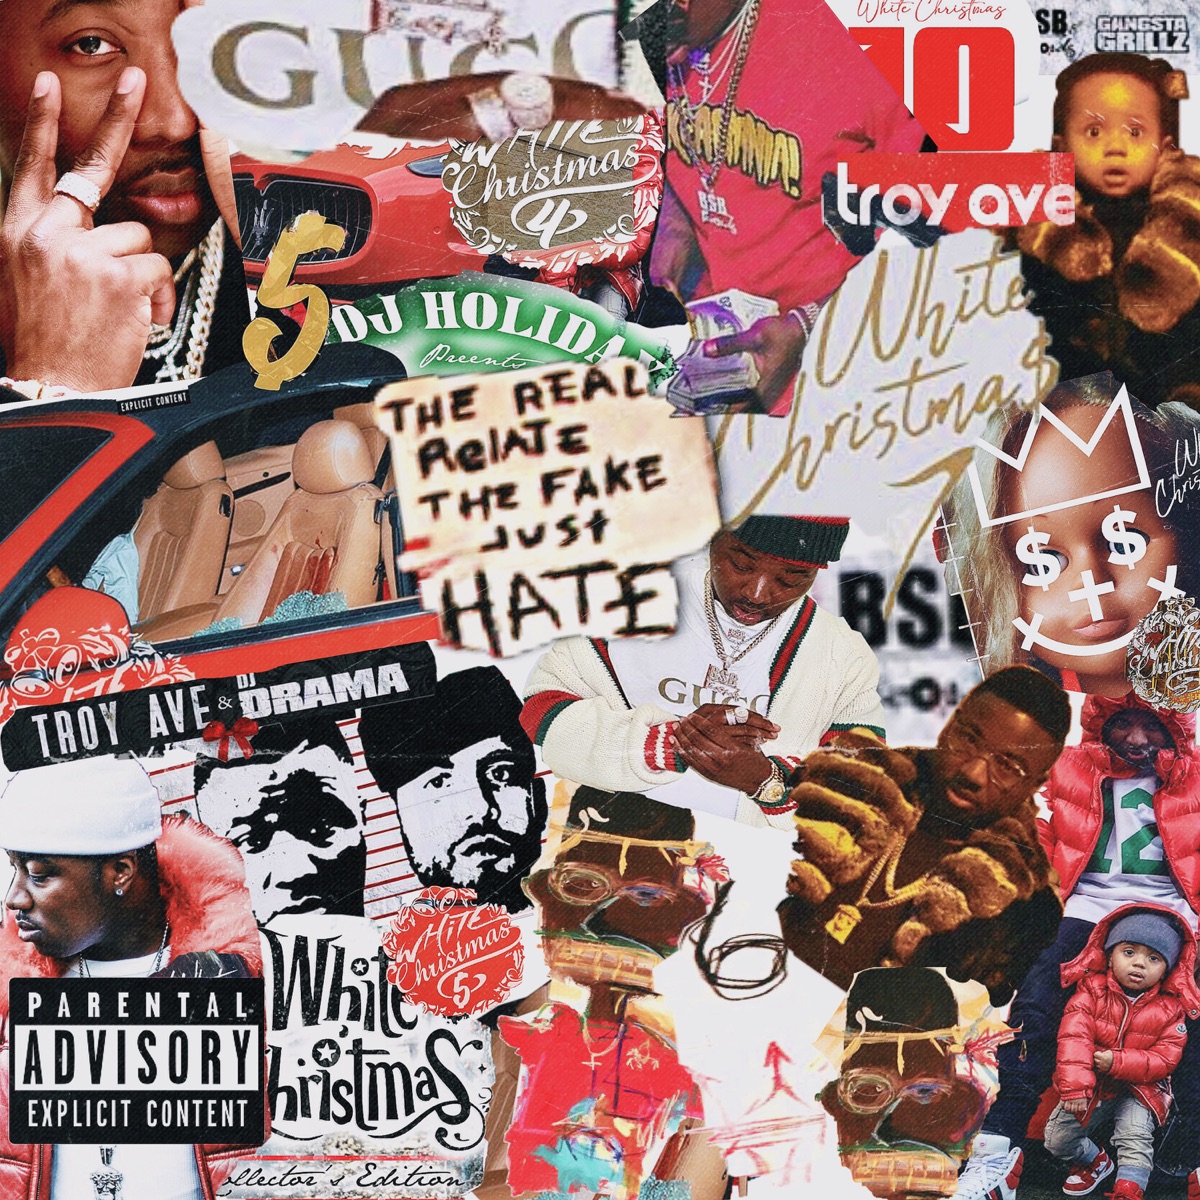 Troy Ave – Banned From New York